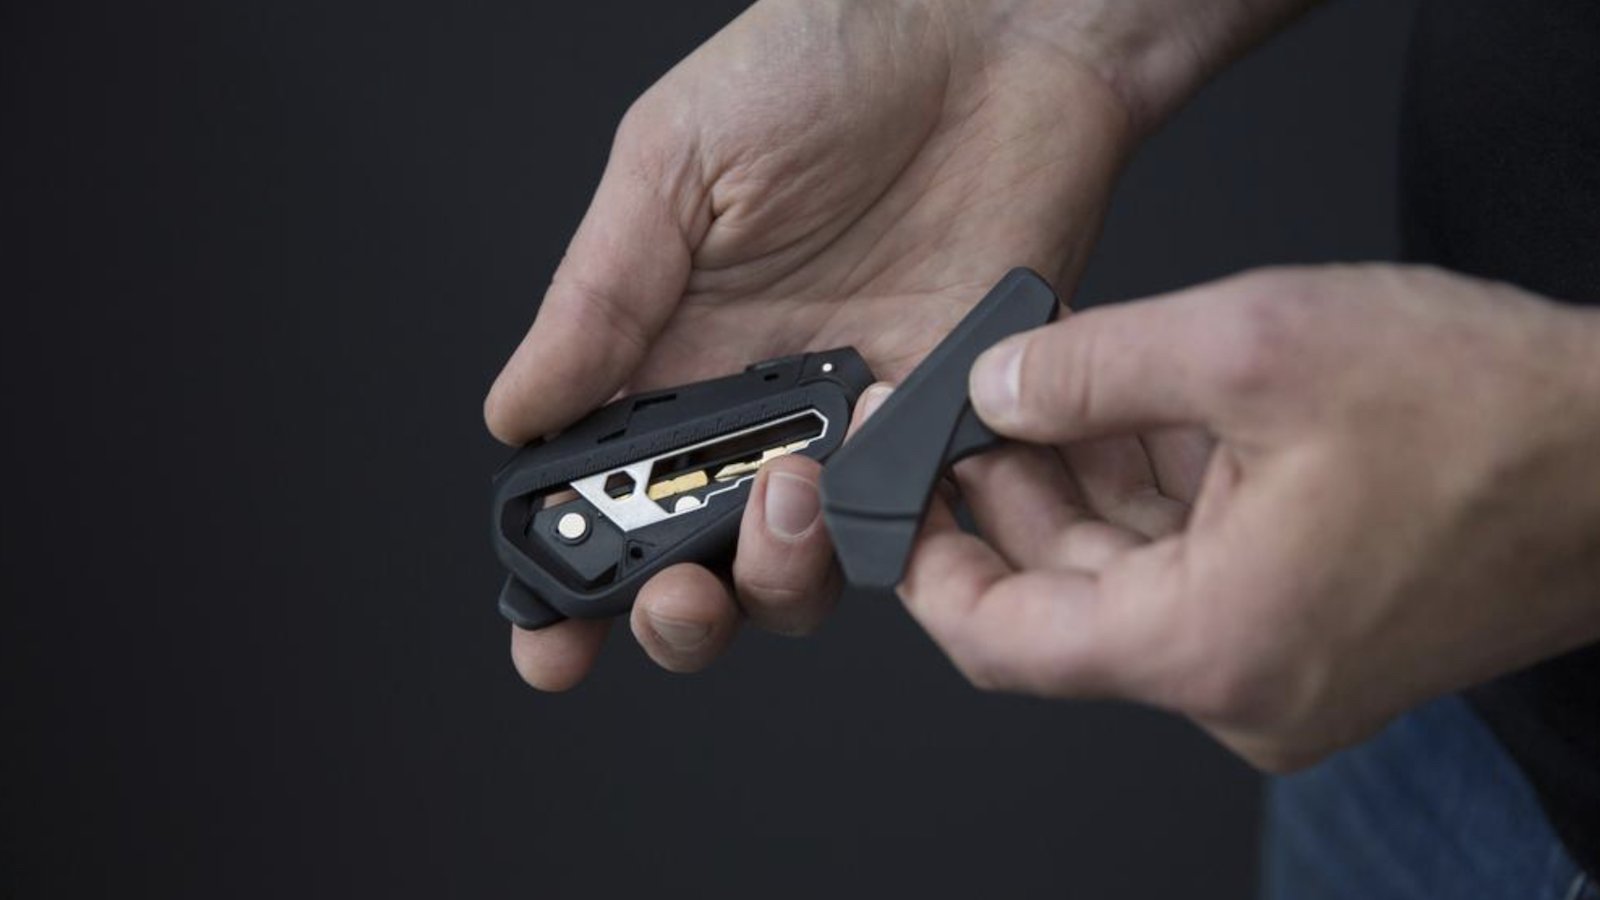 Tactica M.110 bike multitool features 17 different tools in one compact, handy gadget